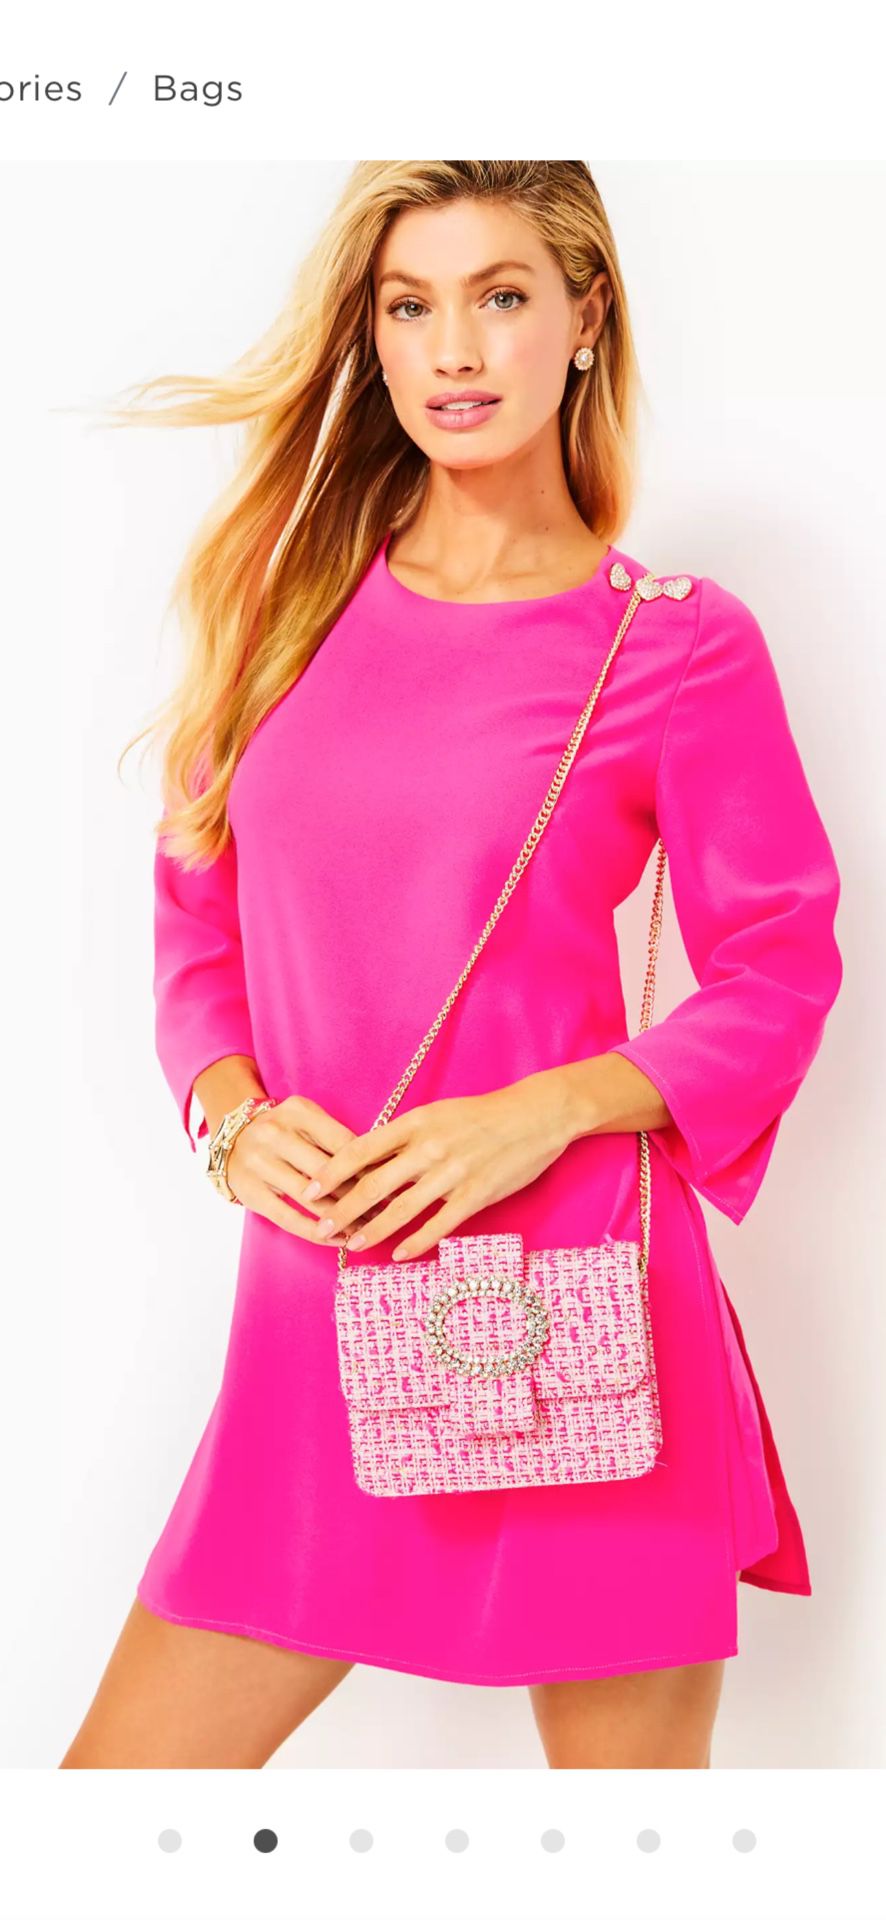 Lilly Pulitzer Bag